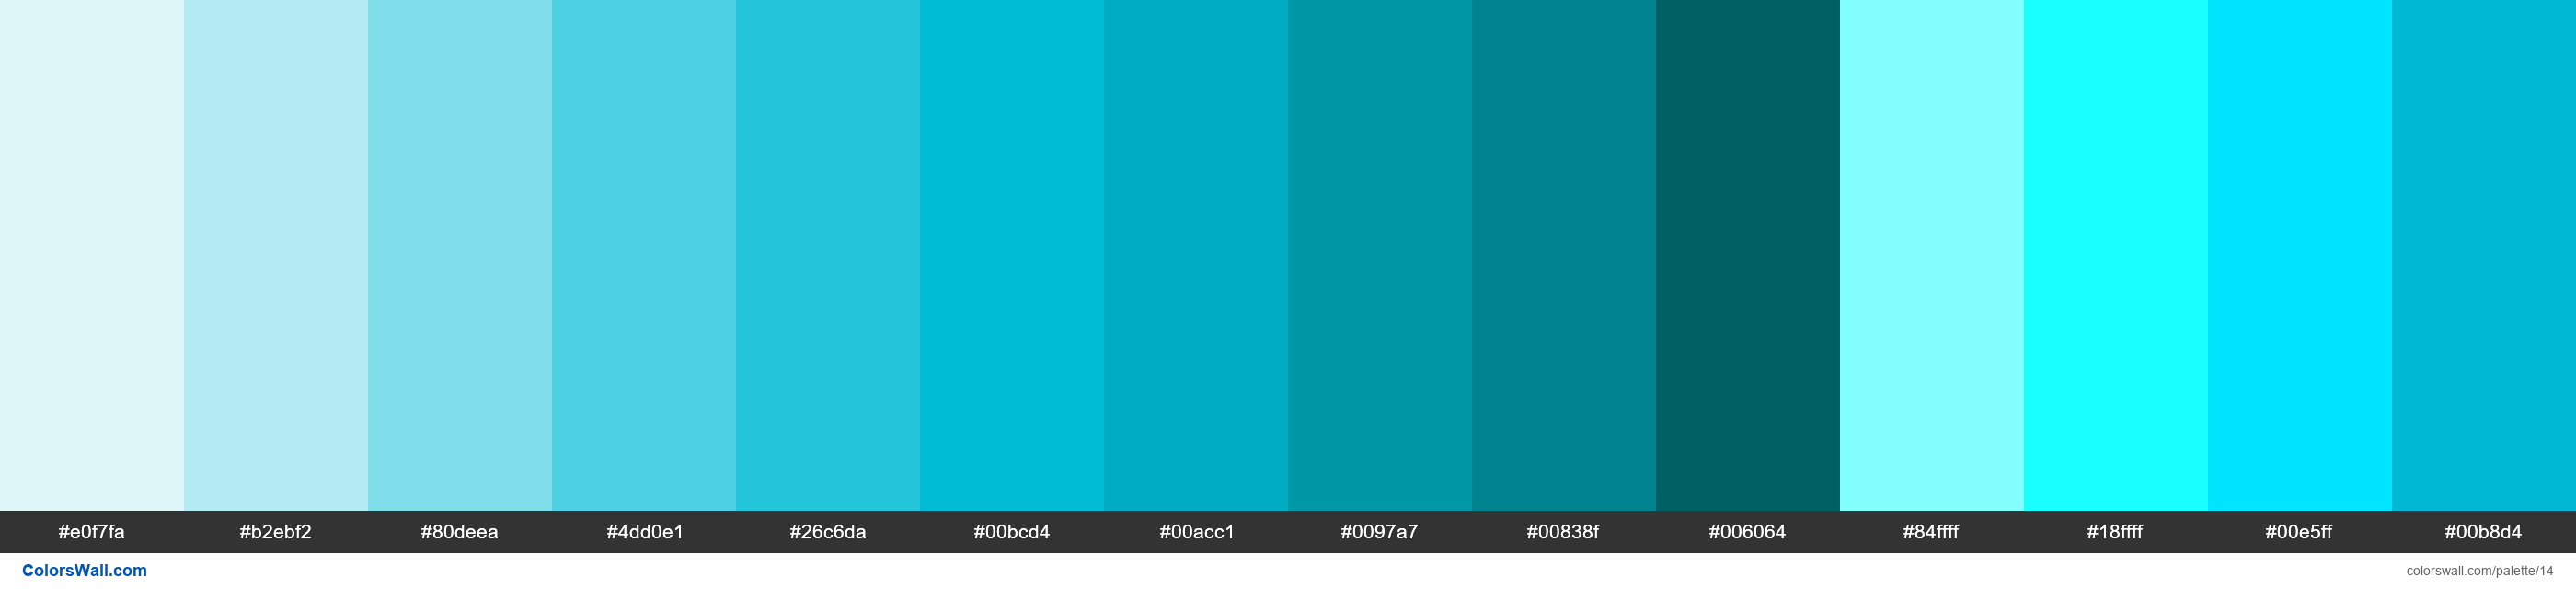 Cyan palette Materialize CSS - #14